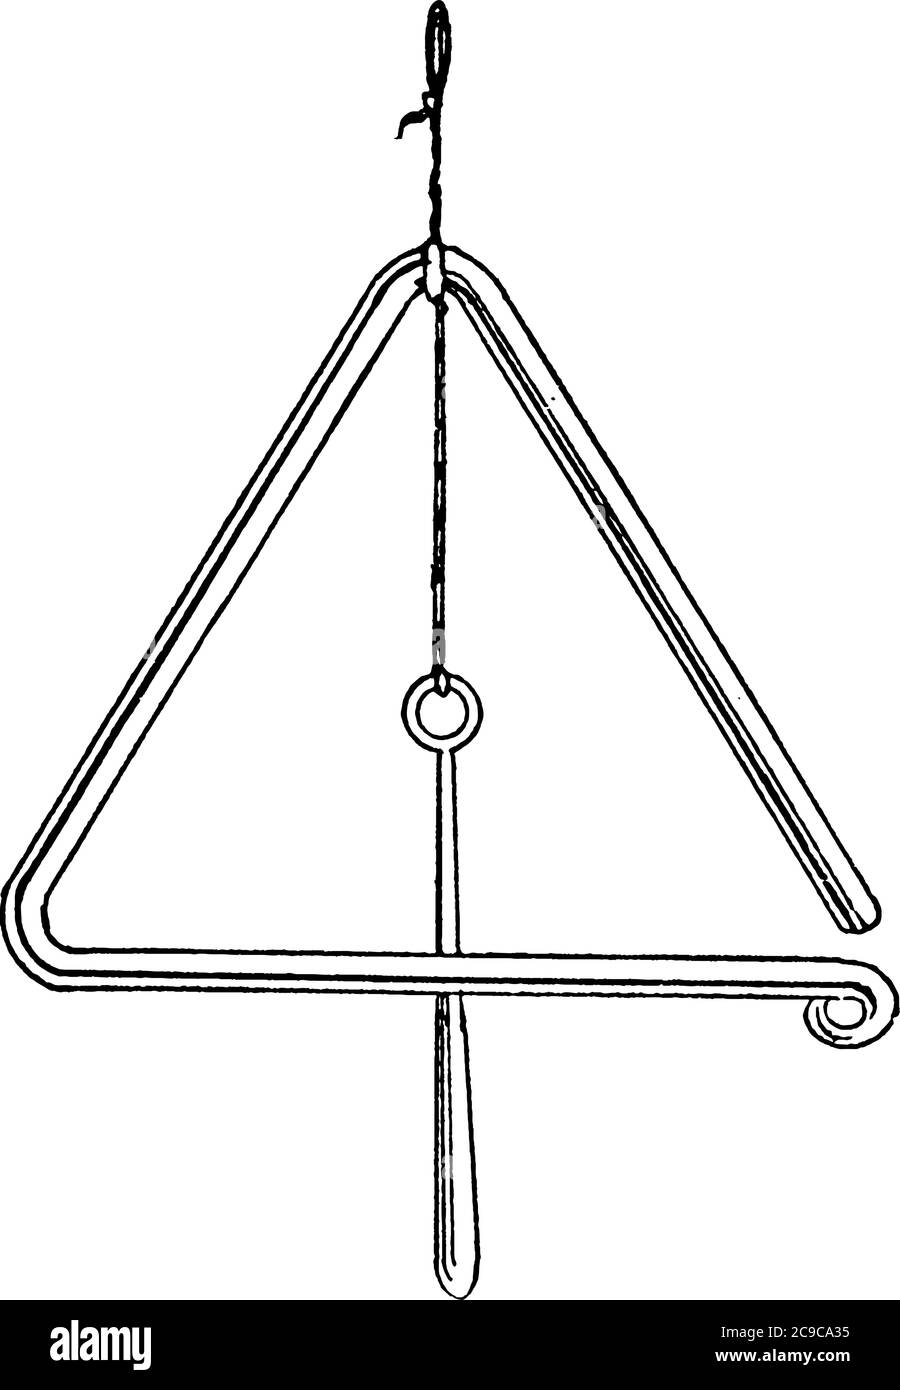 A typical representation of a cylindrical steel bar, bent into an equilateral triangle. It is struck with a small bar of the same metal, vintage line Stock Vector